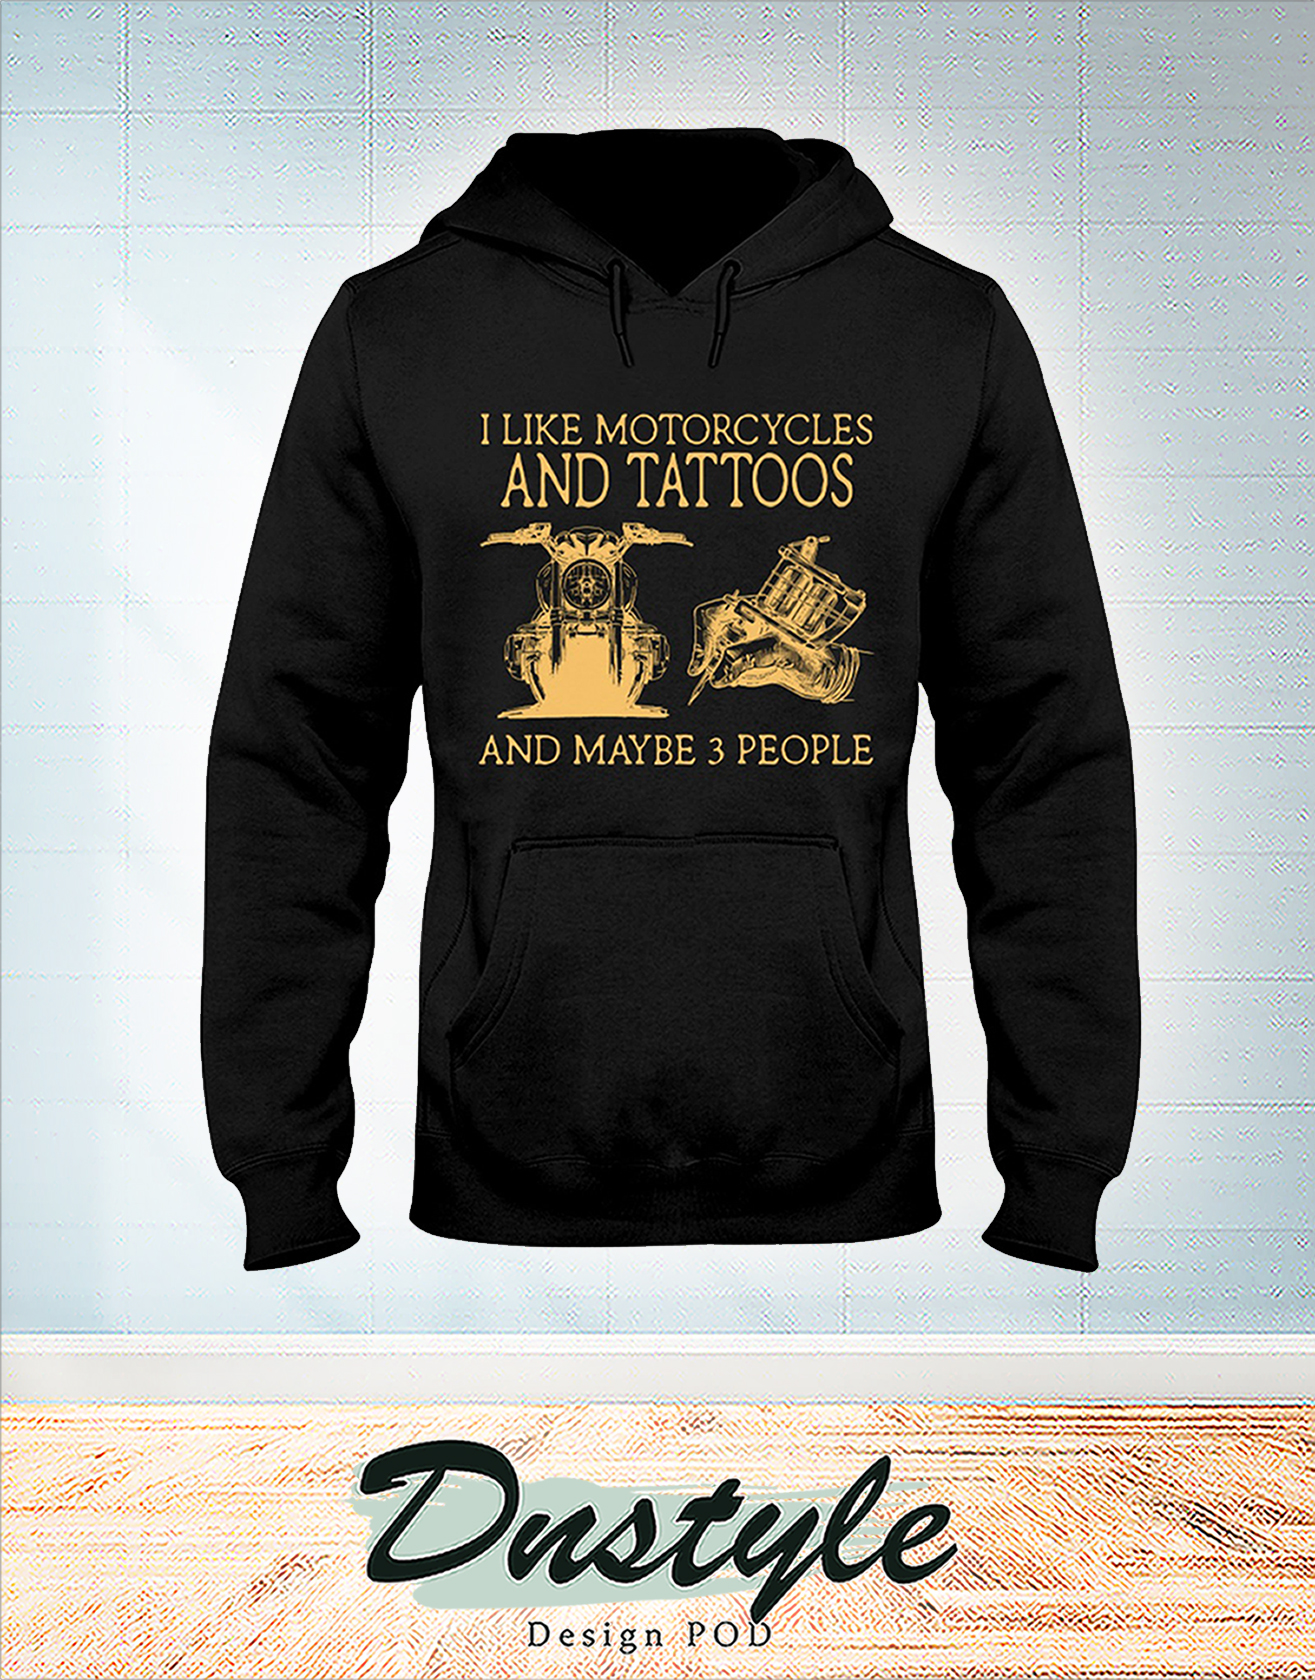 I like motorcycles and tattoos and maybe 3 people hoodie